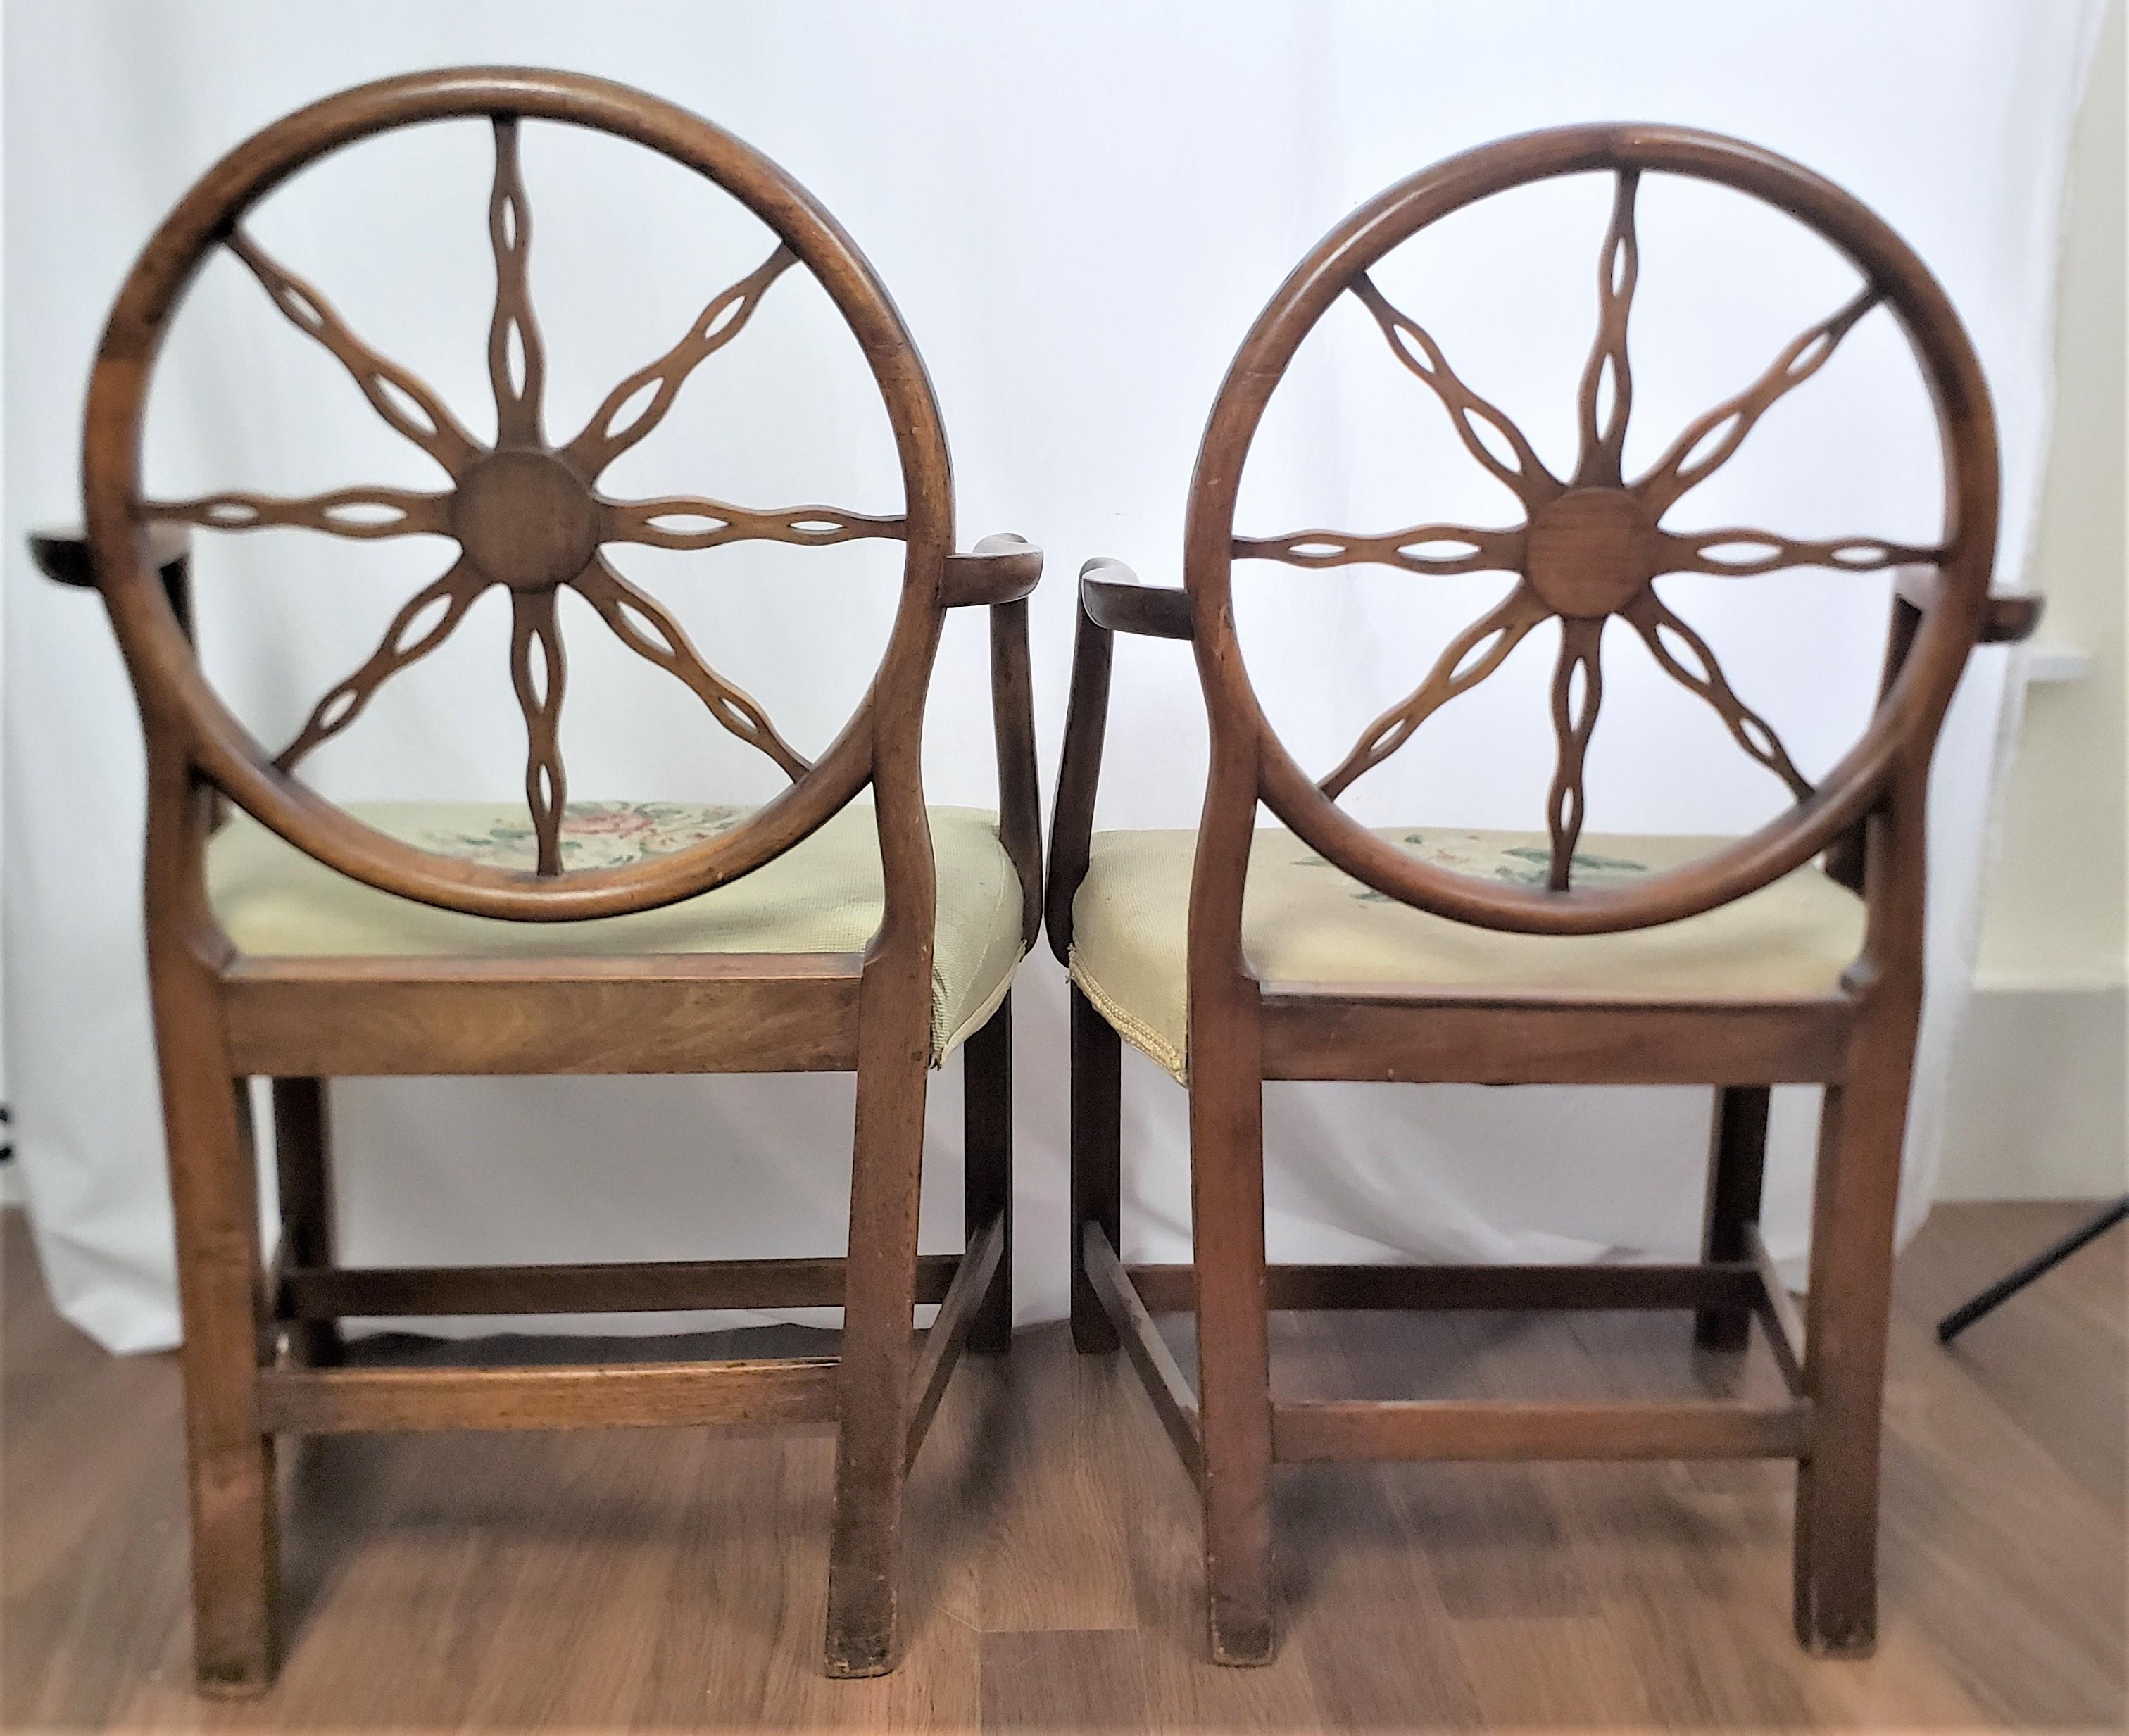 English Pair of Antique King George III Period Wheelback Armchair or Side Chair Frames For Sale